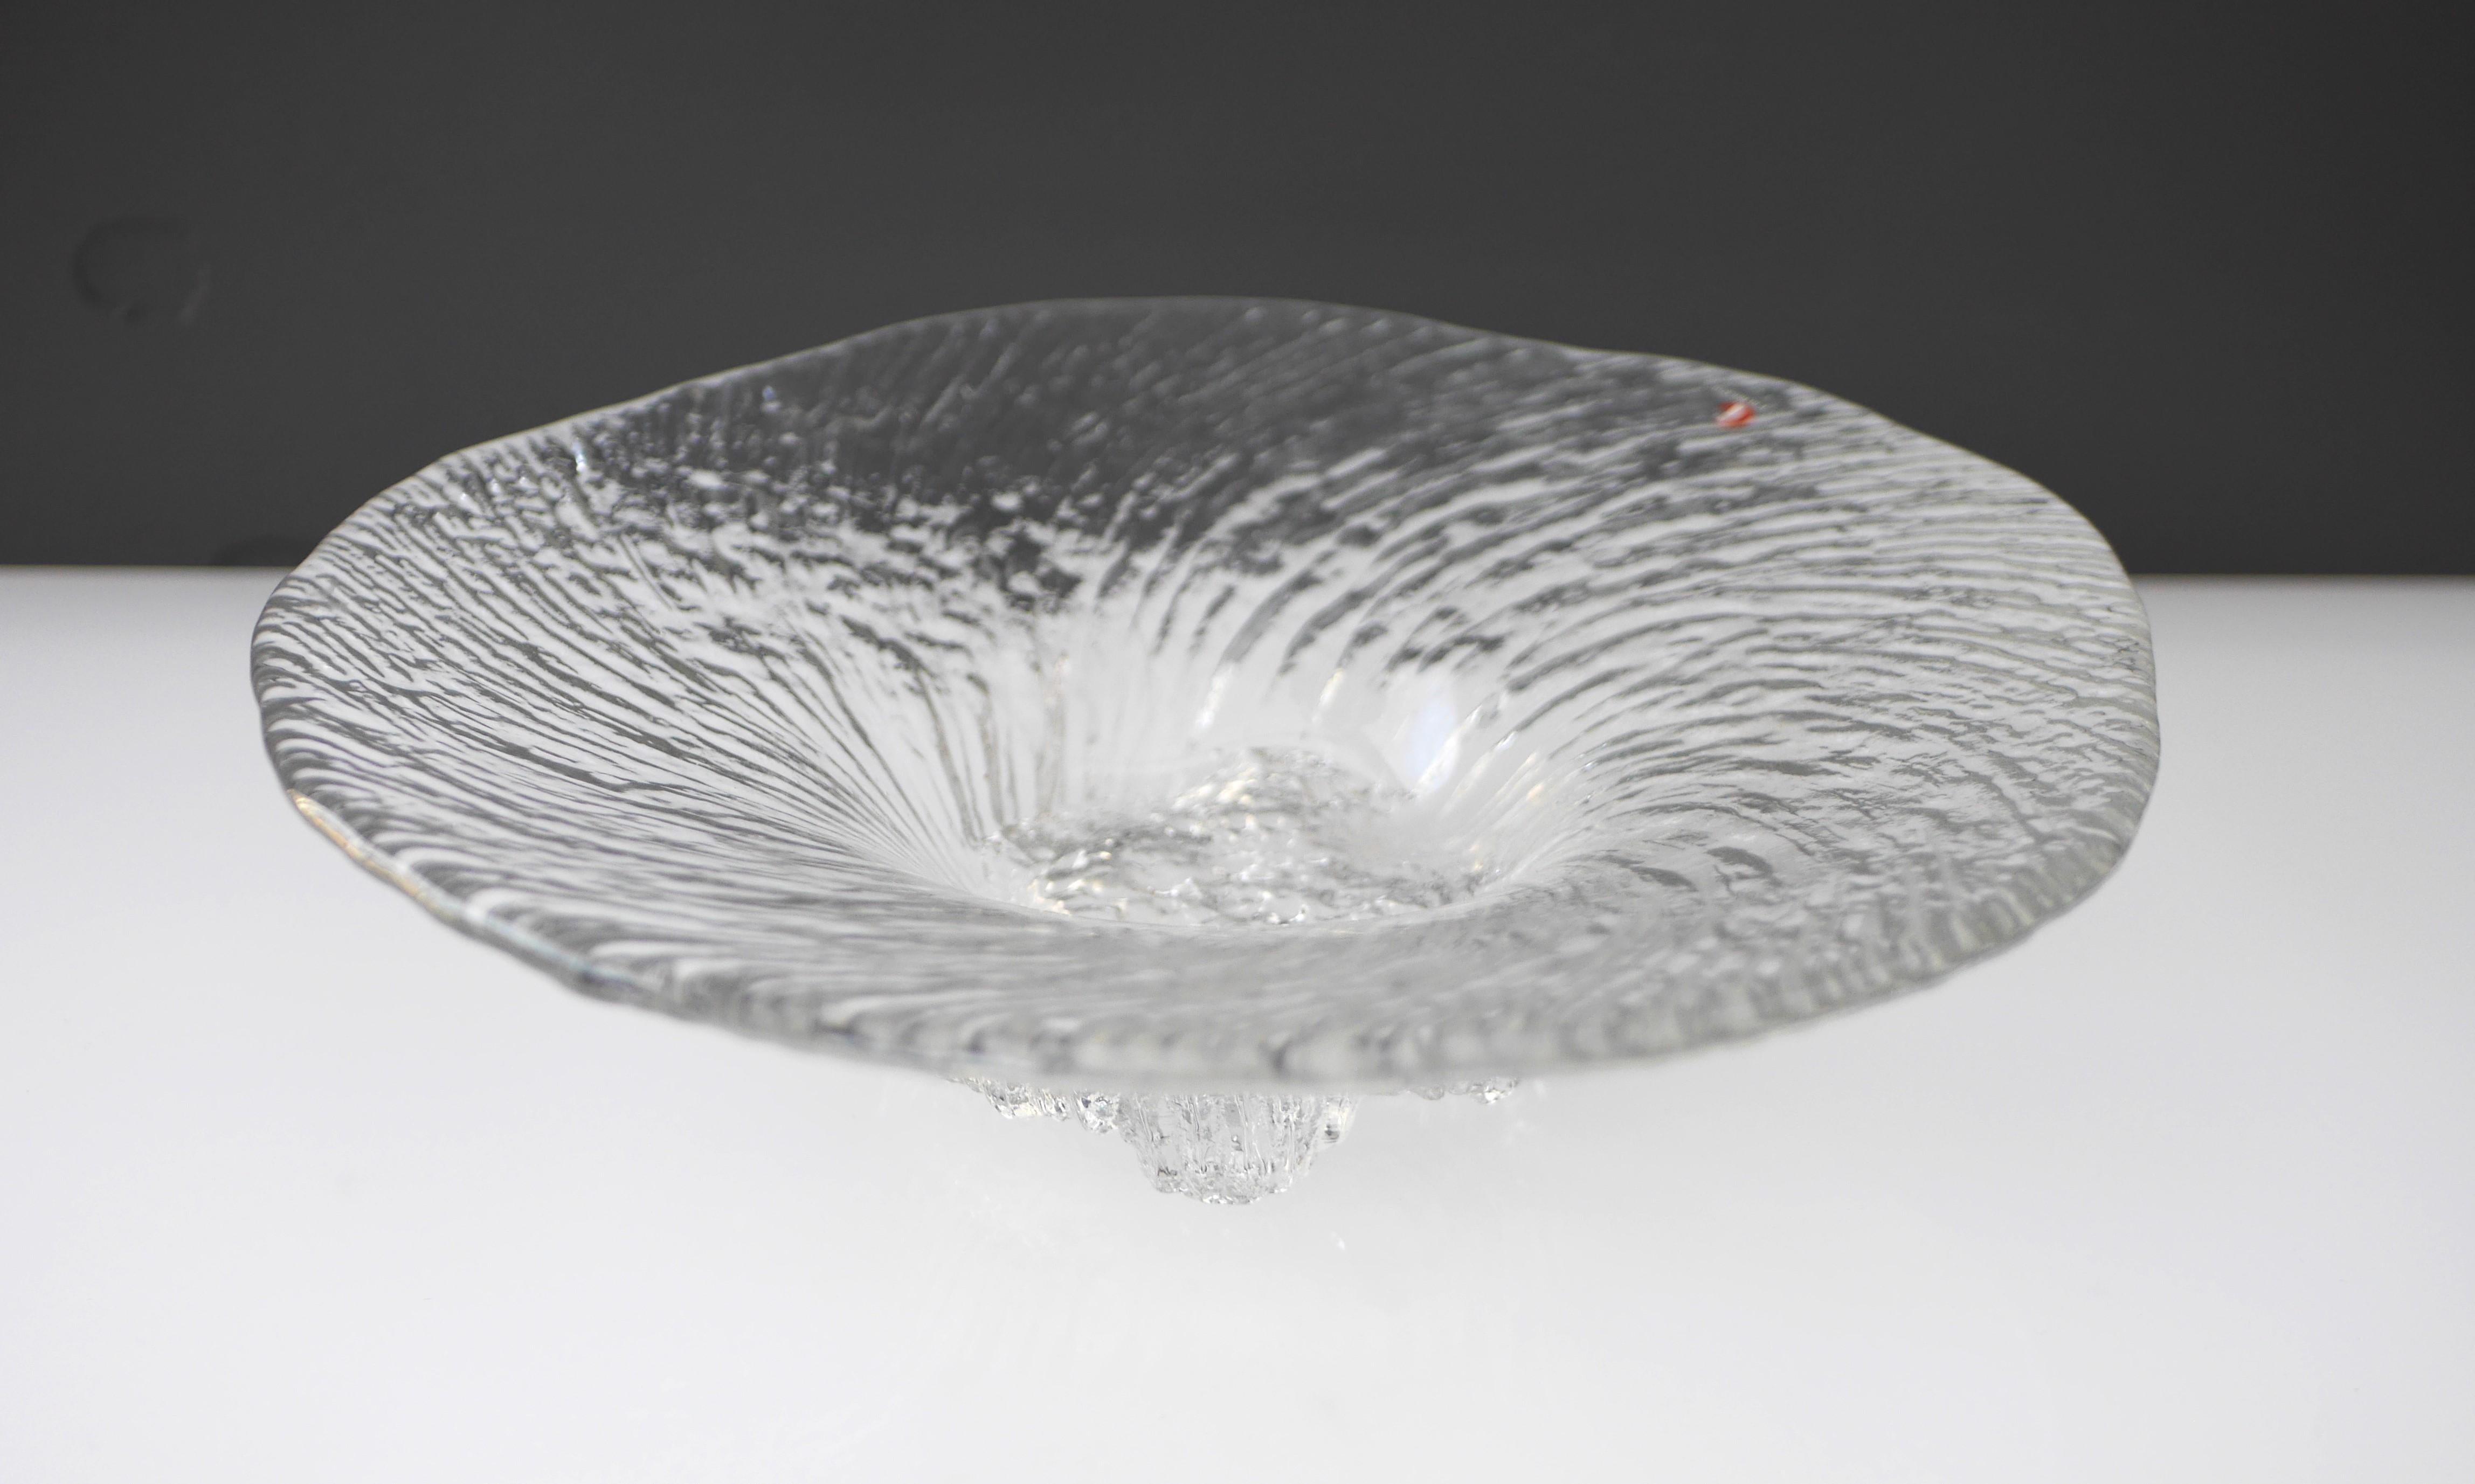 Rare and very beautiful Scandinavian glass design, a rather large footed bowl or plate, suitable for fruit or confectionery made by Iittala Finland. The bowl is known as 